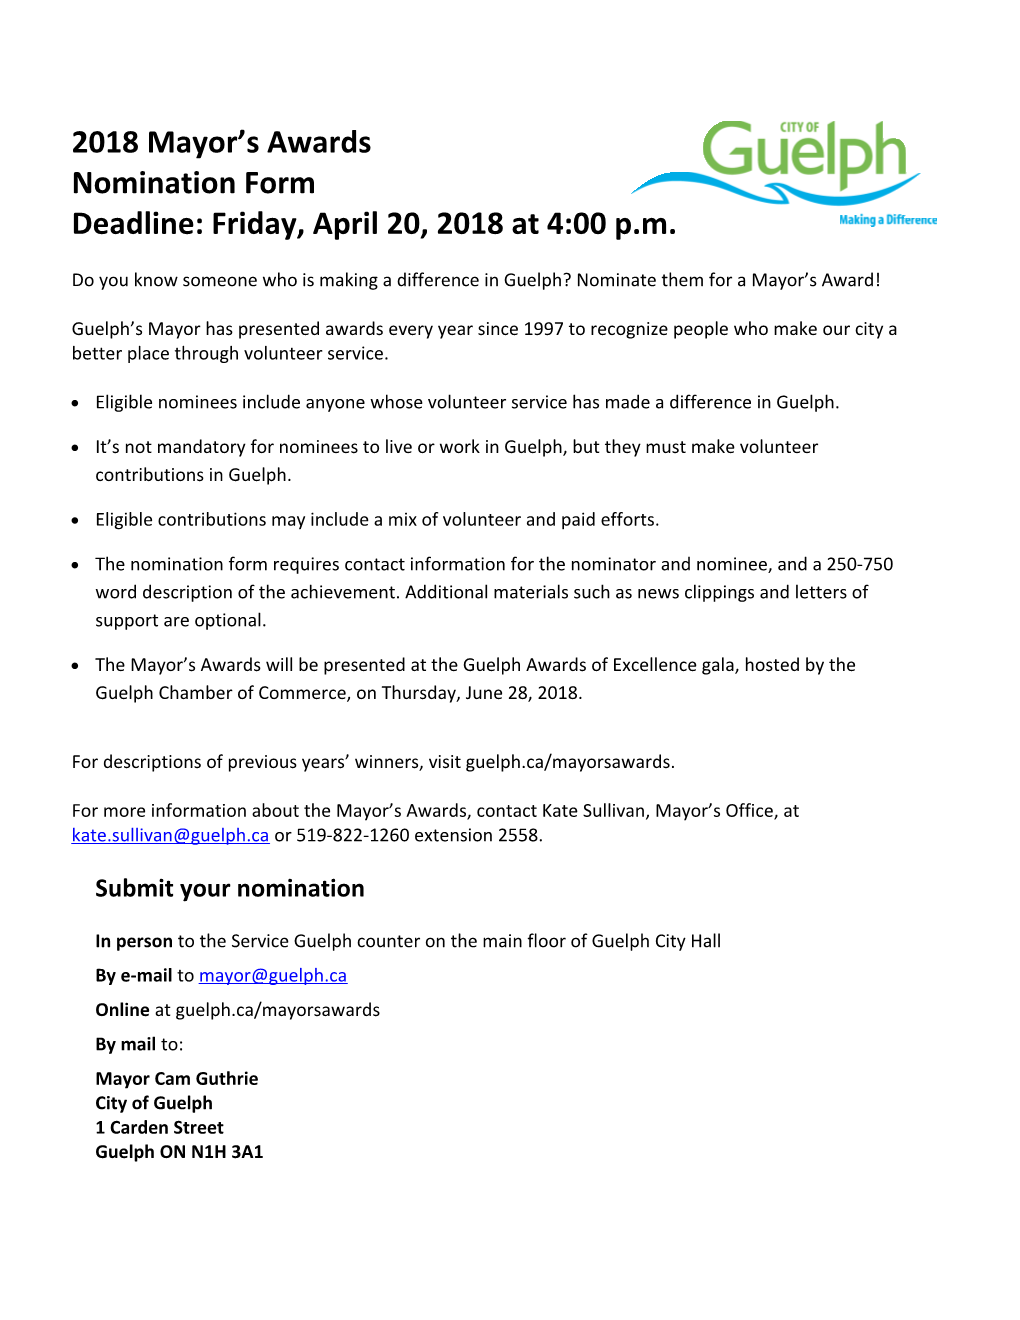 Do You Know Someone Who Is Making a Difference in Guelph? Nominate Them for a Mayor S Award!